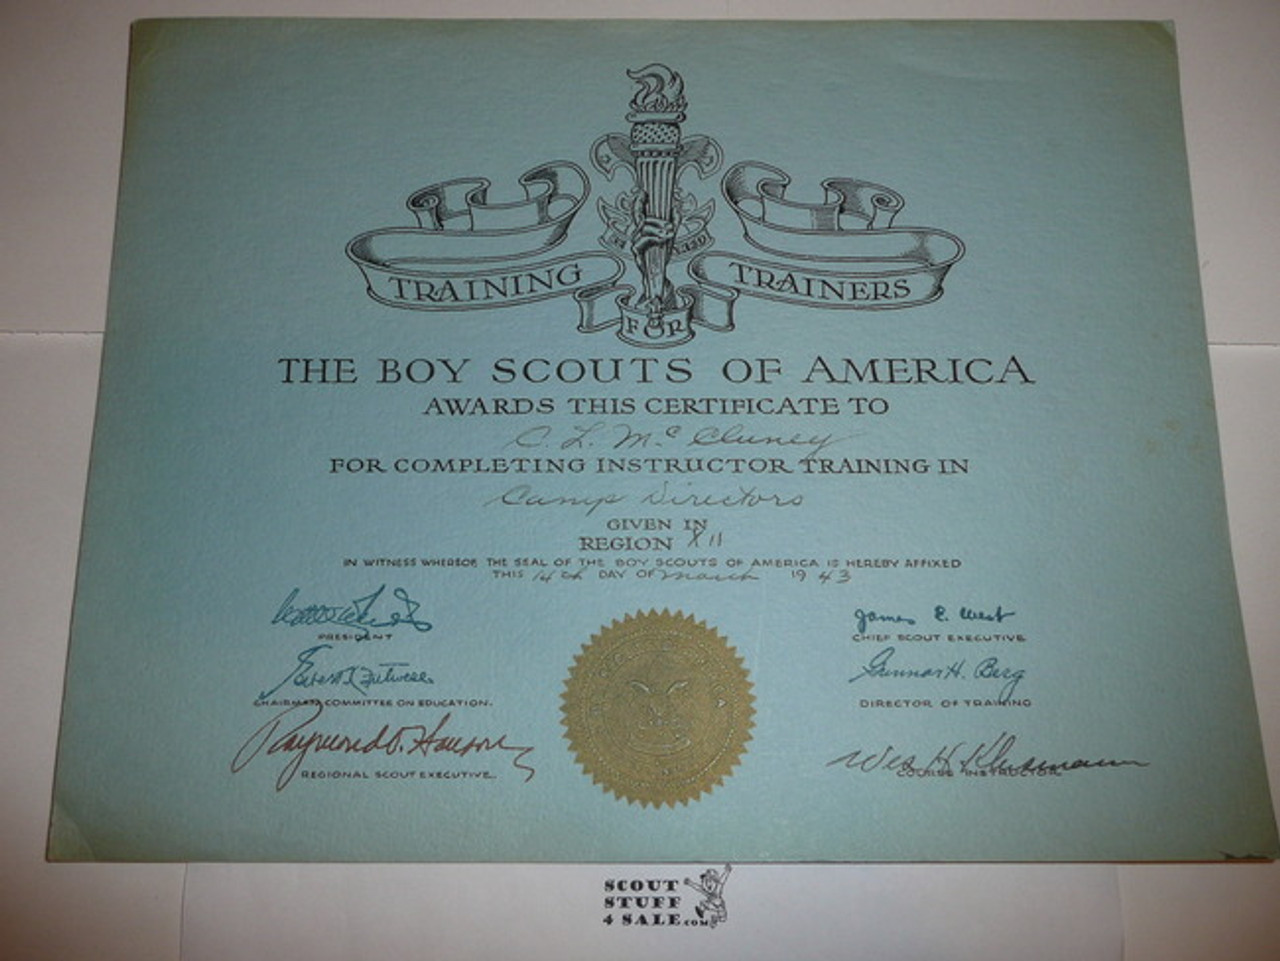 1943 National Train the Trainers Training Certificate, presented